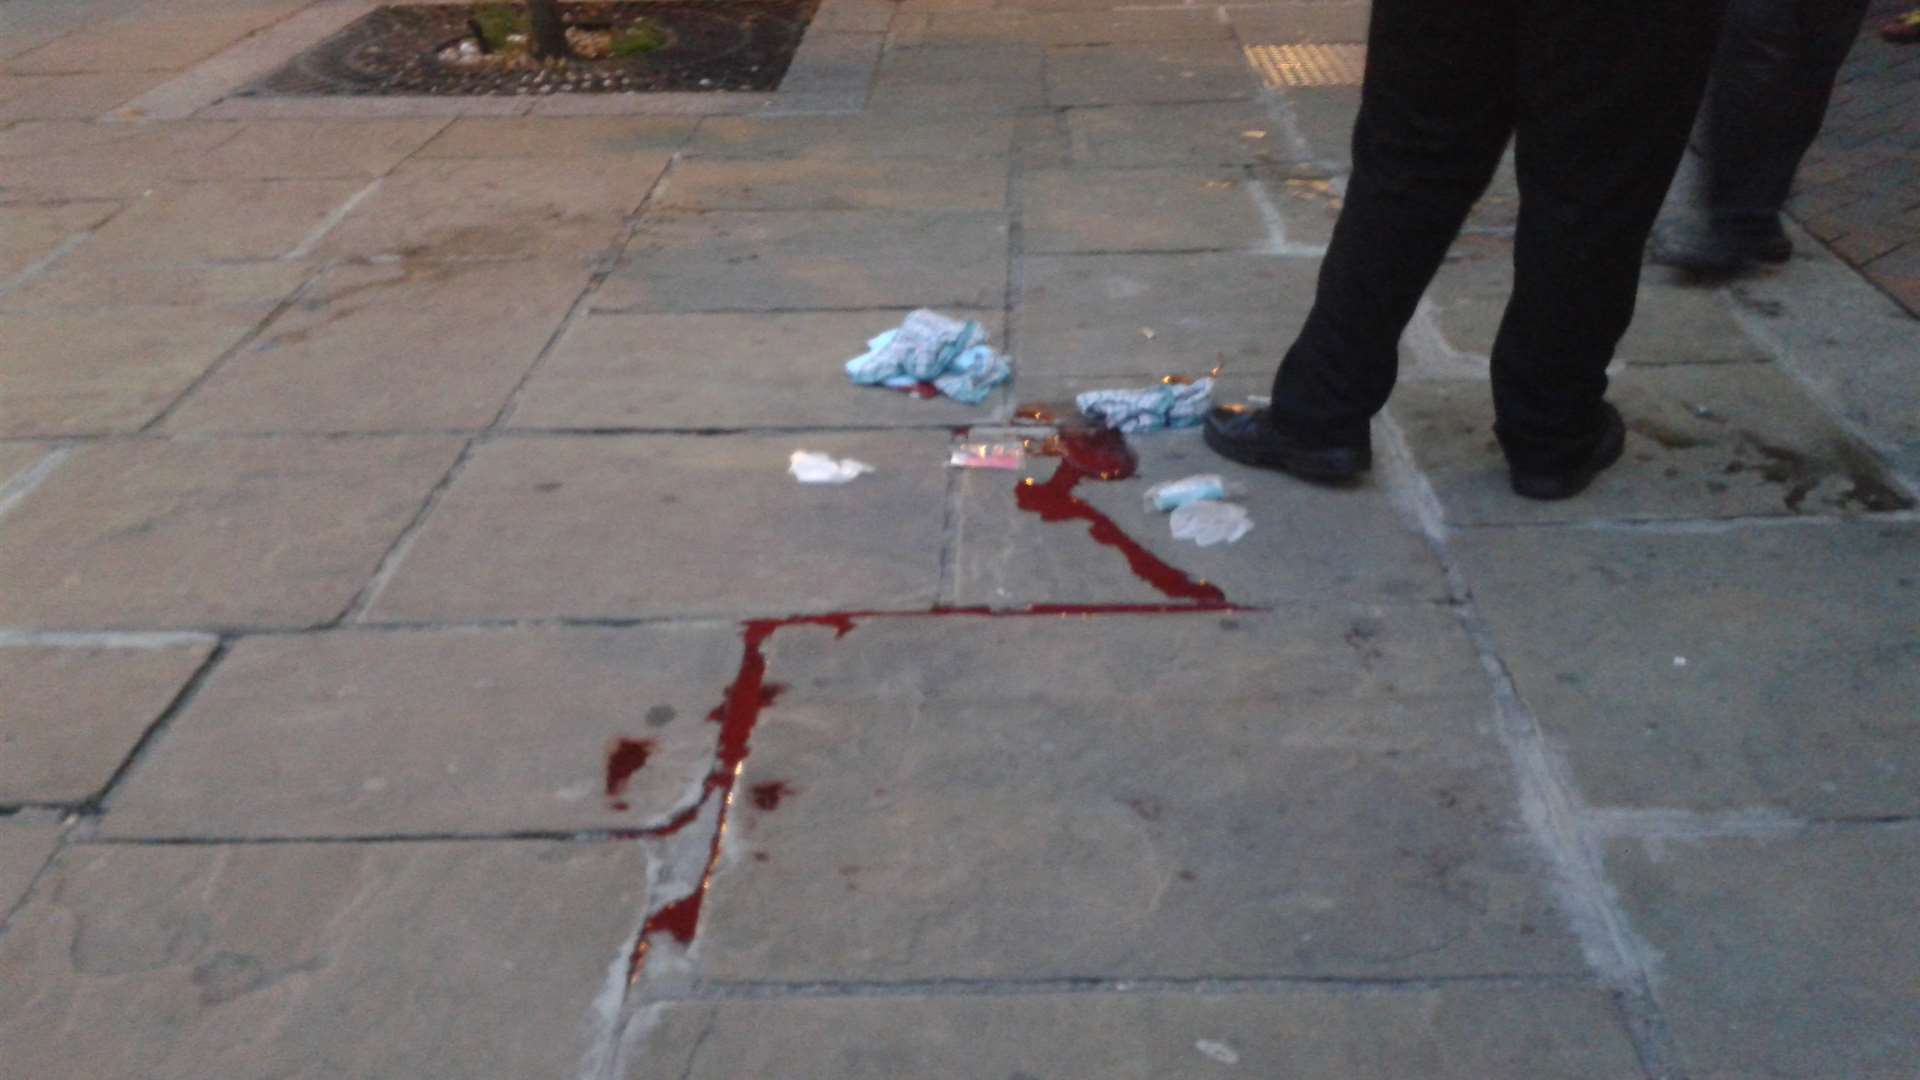 Blood was left on the pavement following the incident